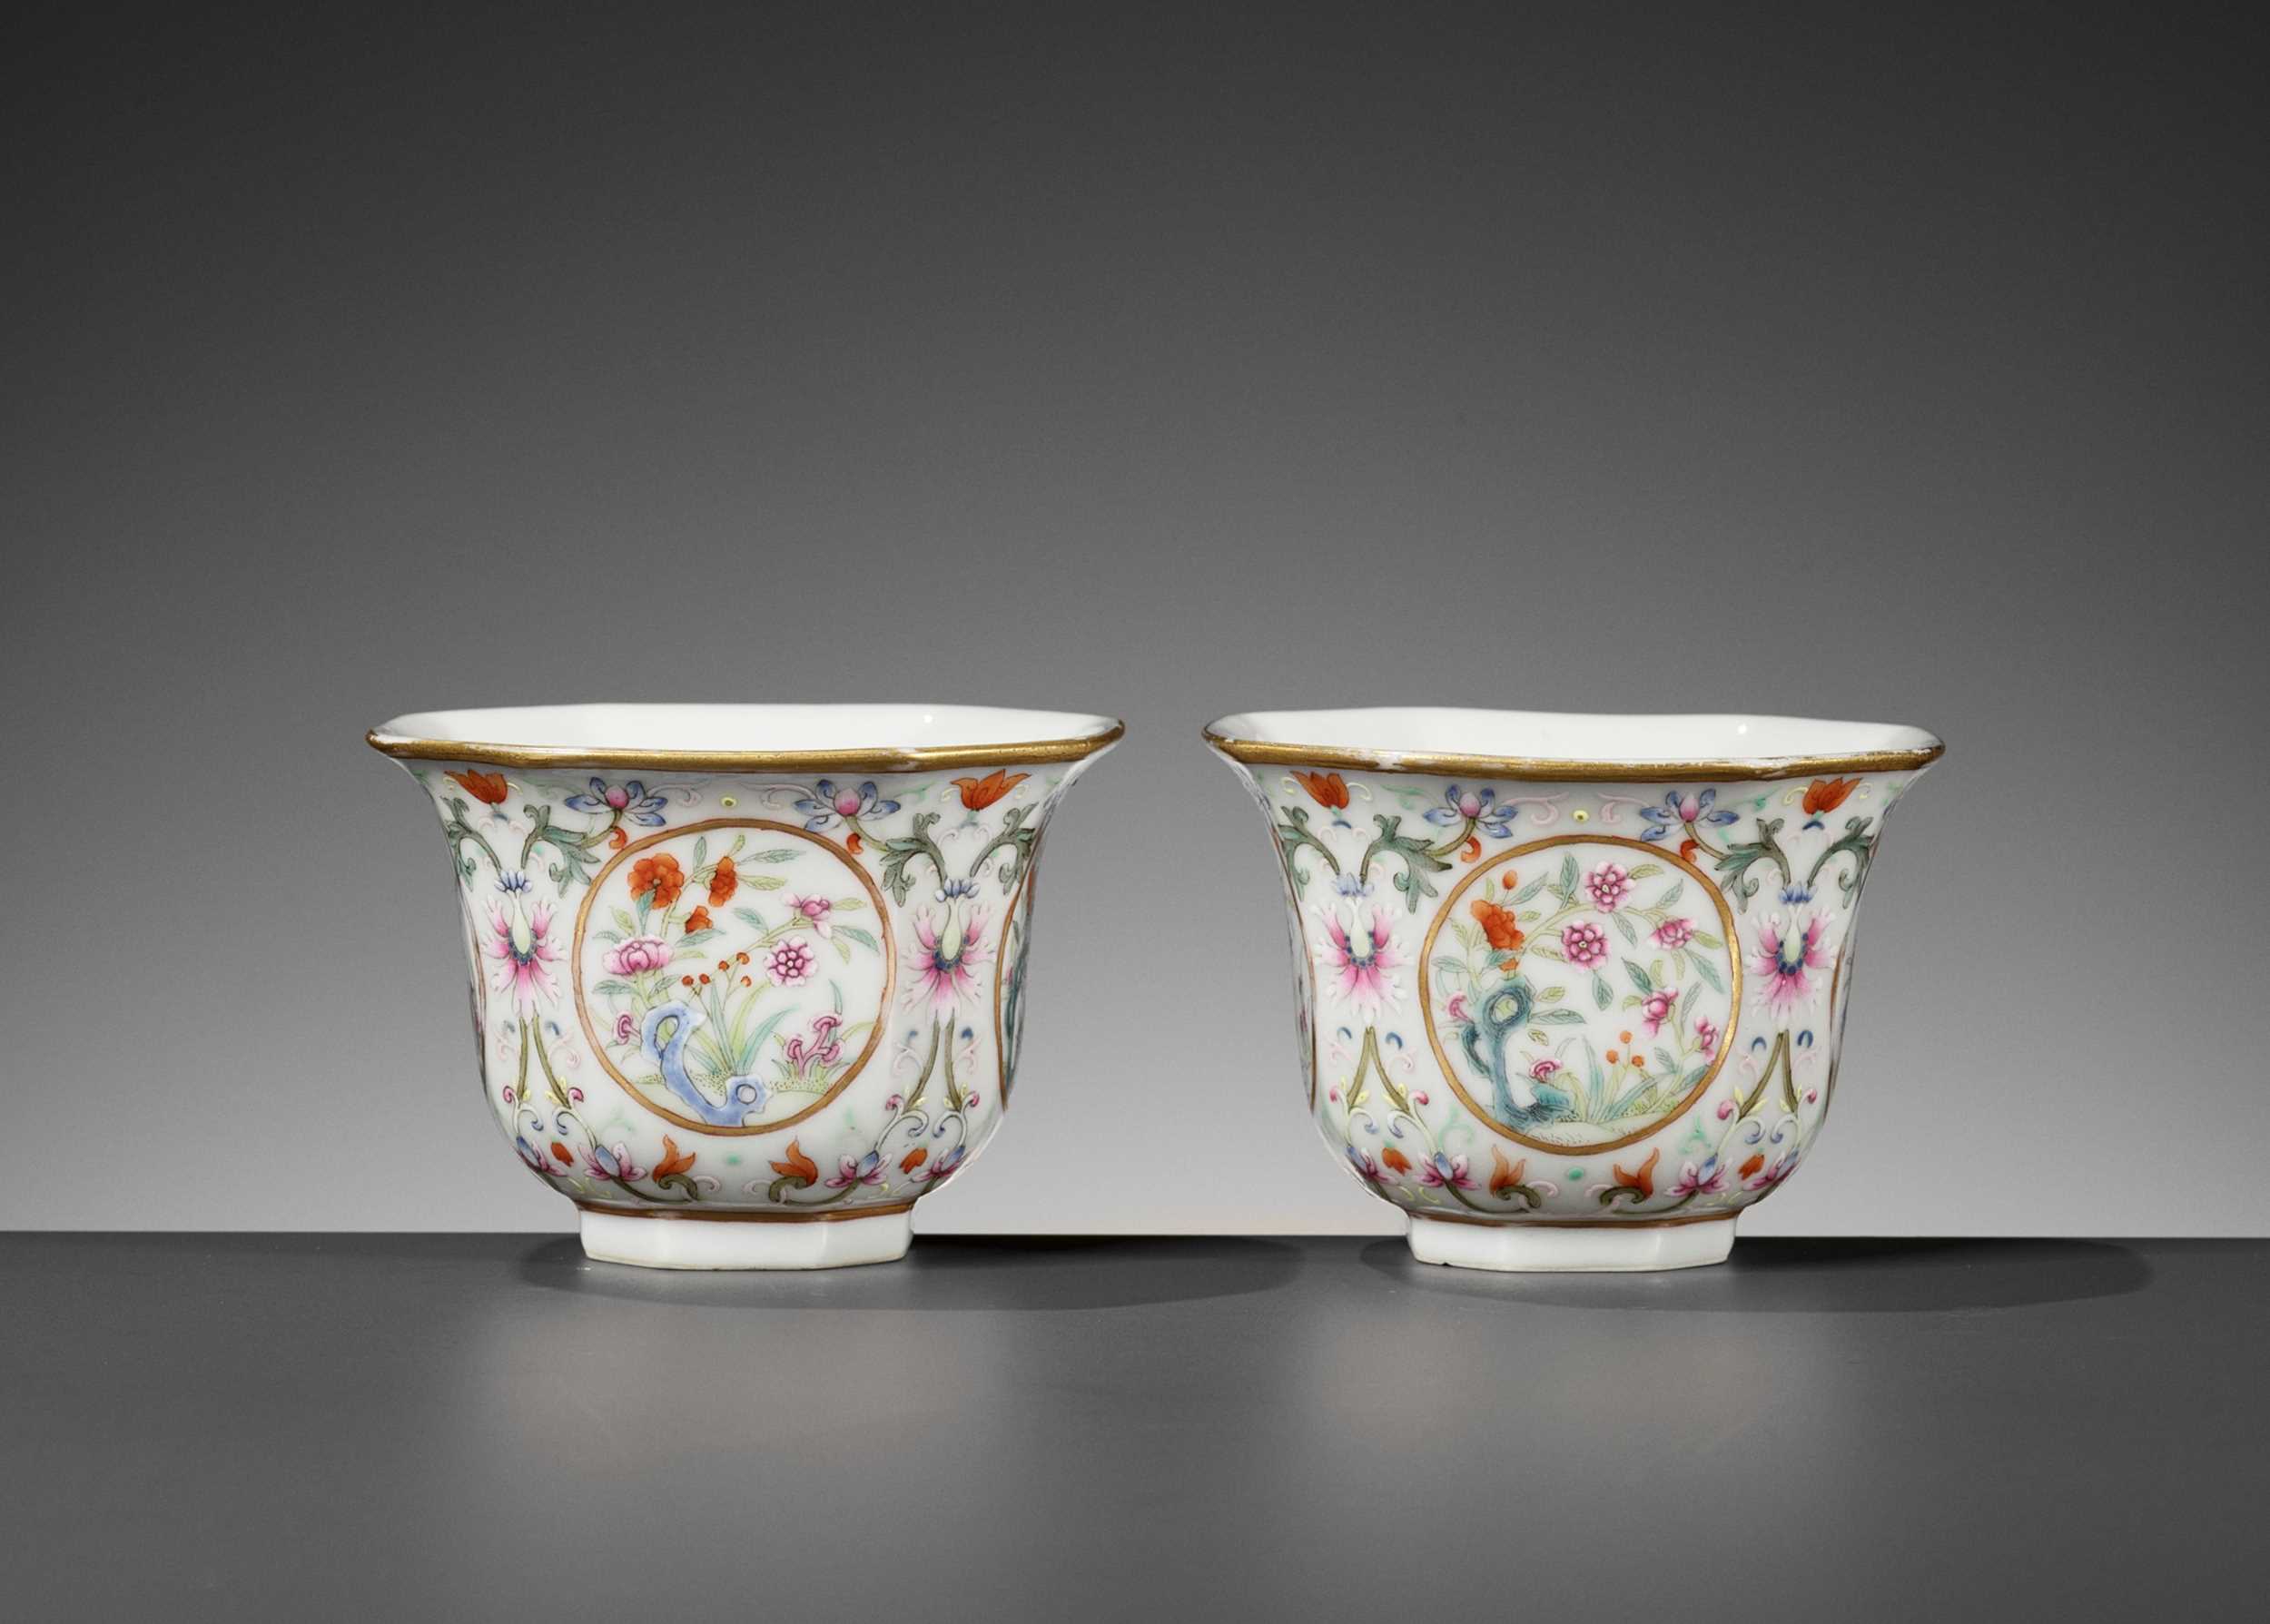 Lot 232 - A PAIR OF GILT AND ENAMELED ‘FLORAL’ CUPS, SHENDETANG HALL MARKS, DAOGUANG PERIOD